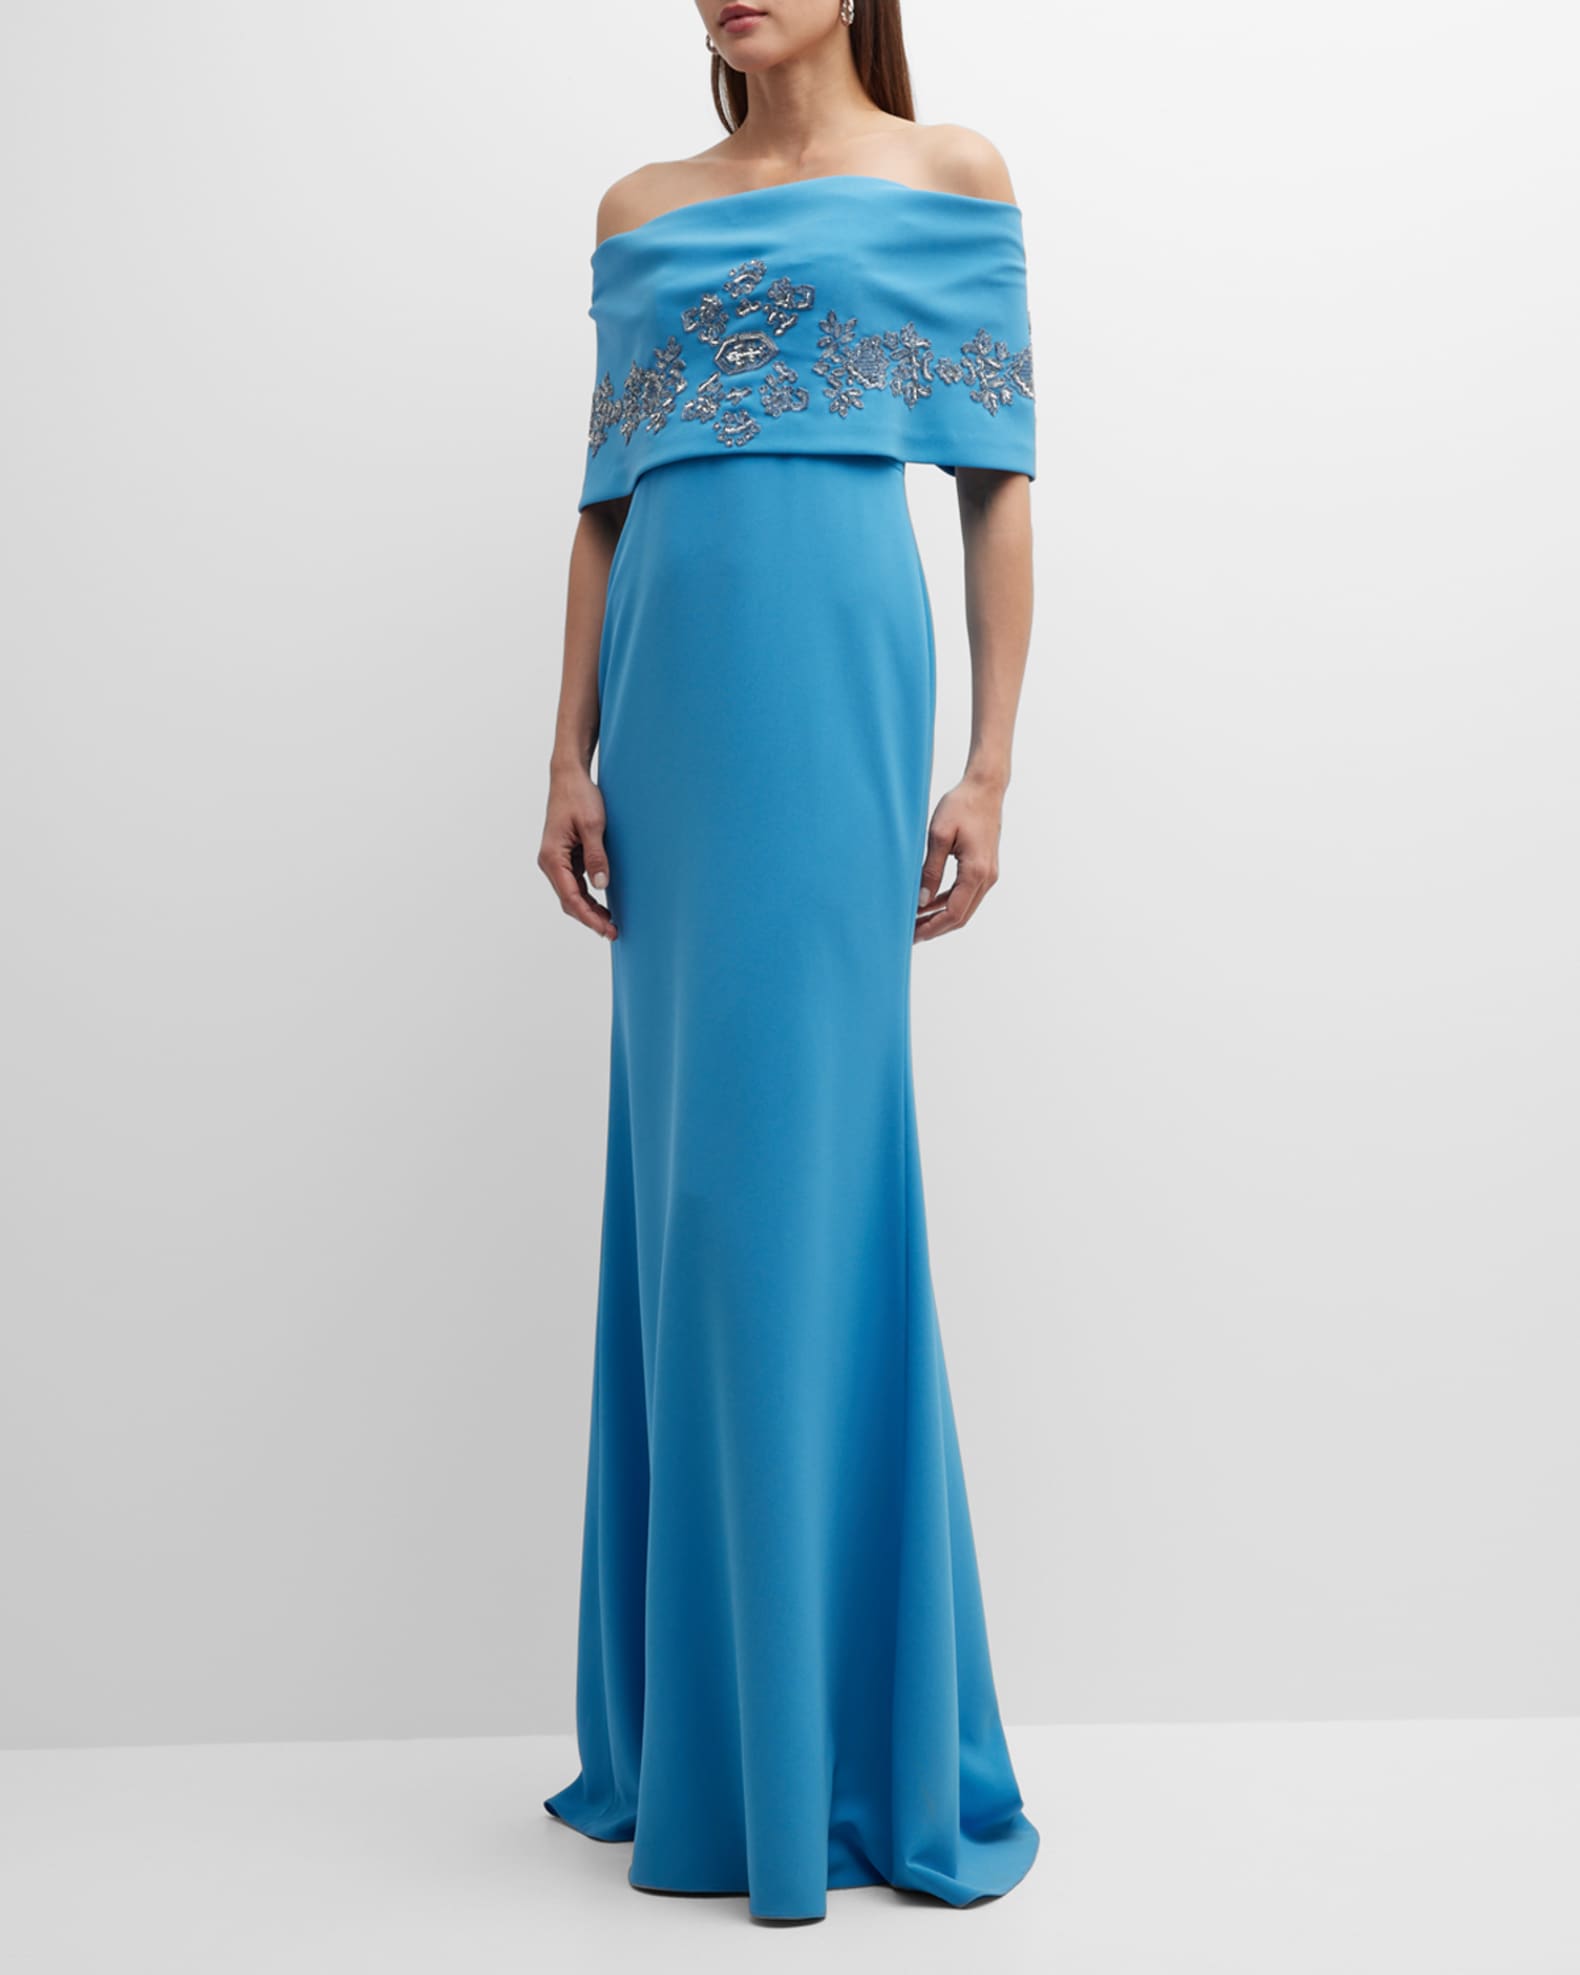 Lela Rose Off-Shoulder Gown with Beaded Embellishments | Neiman Marcus